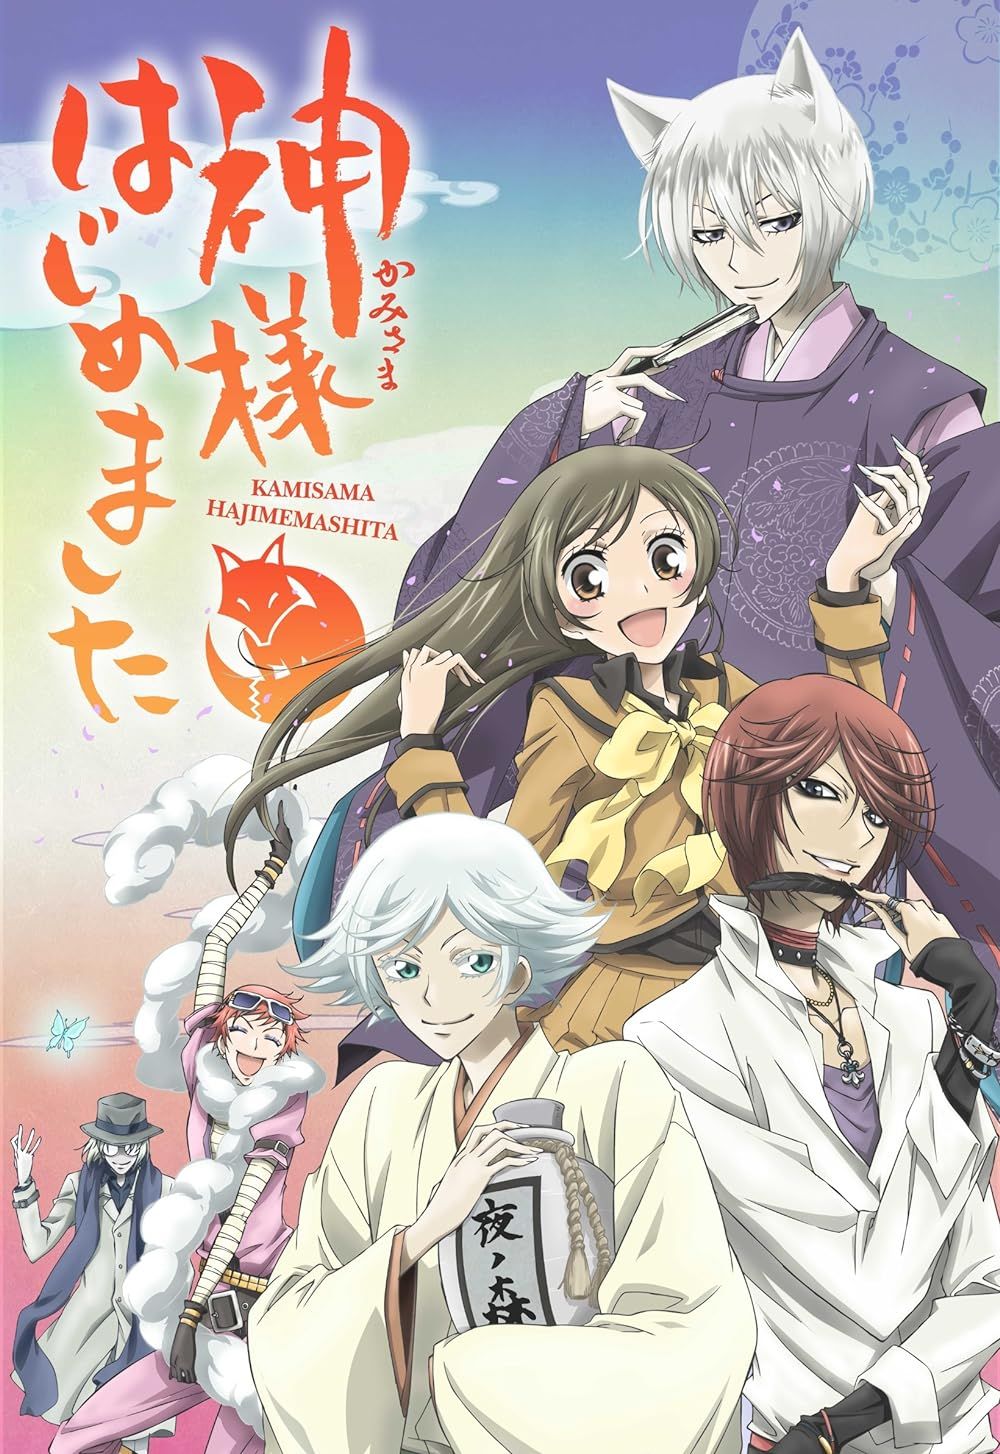 Cast of Kamisama Kiss posing on poster.